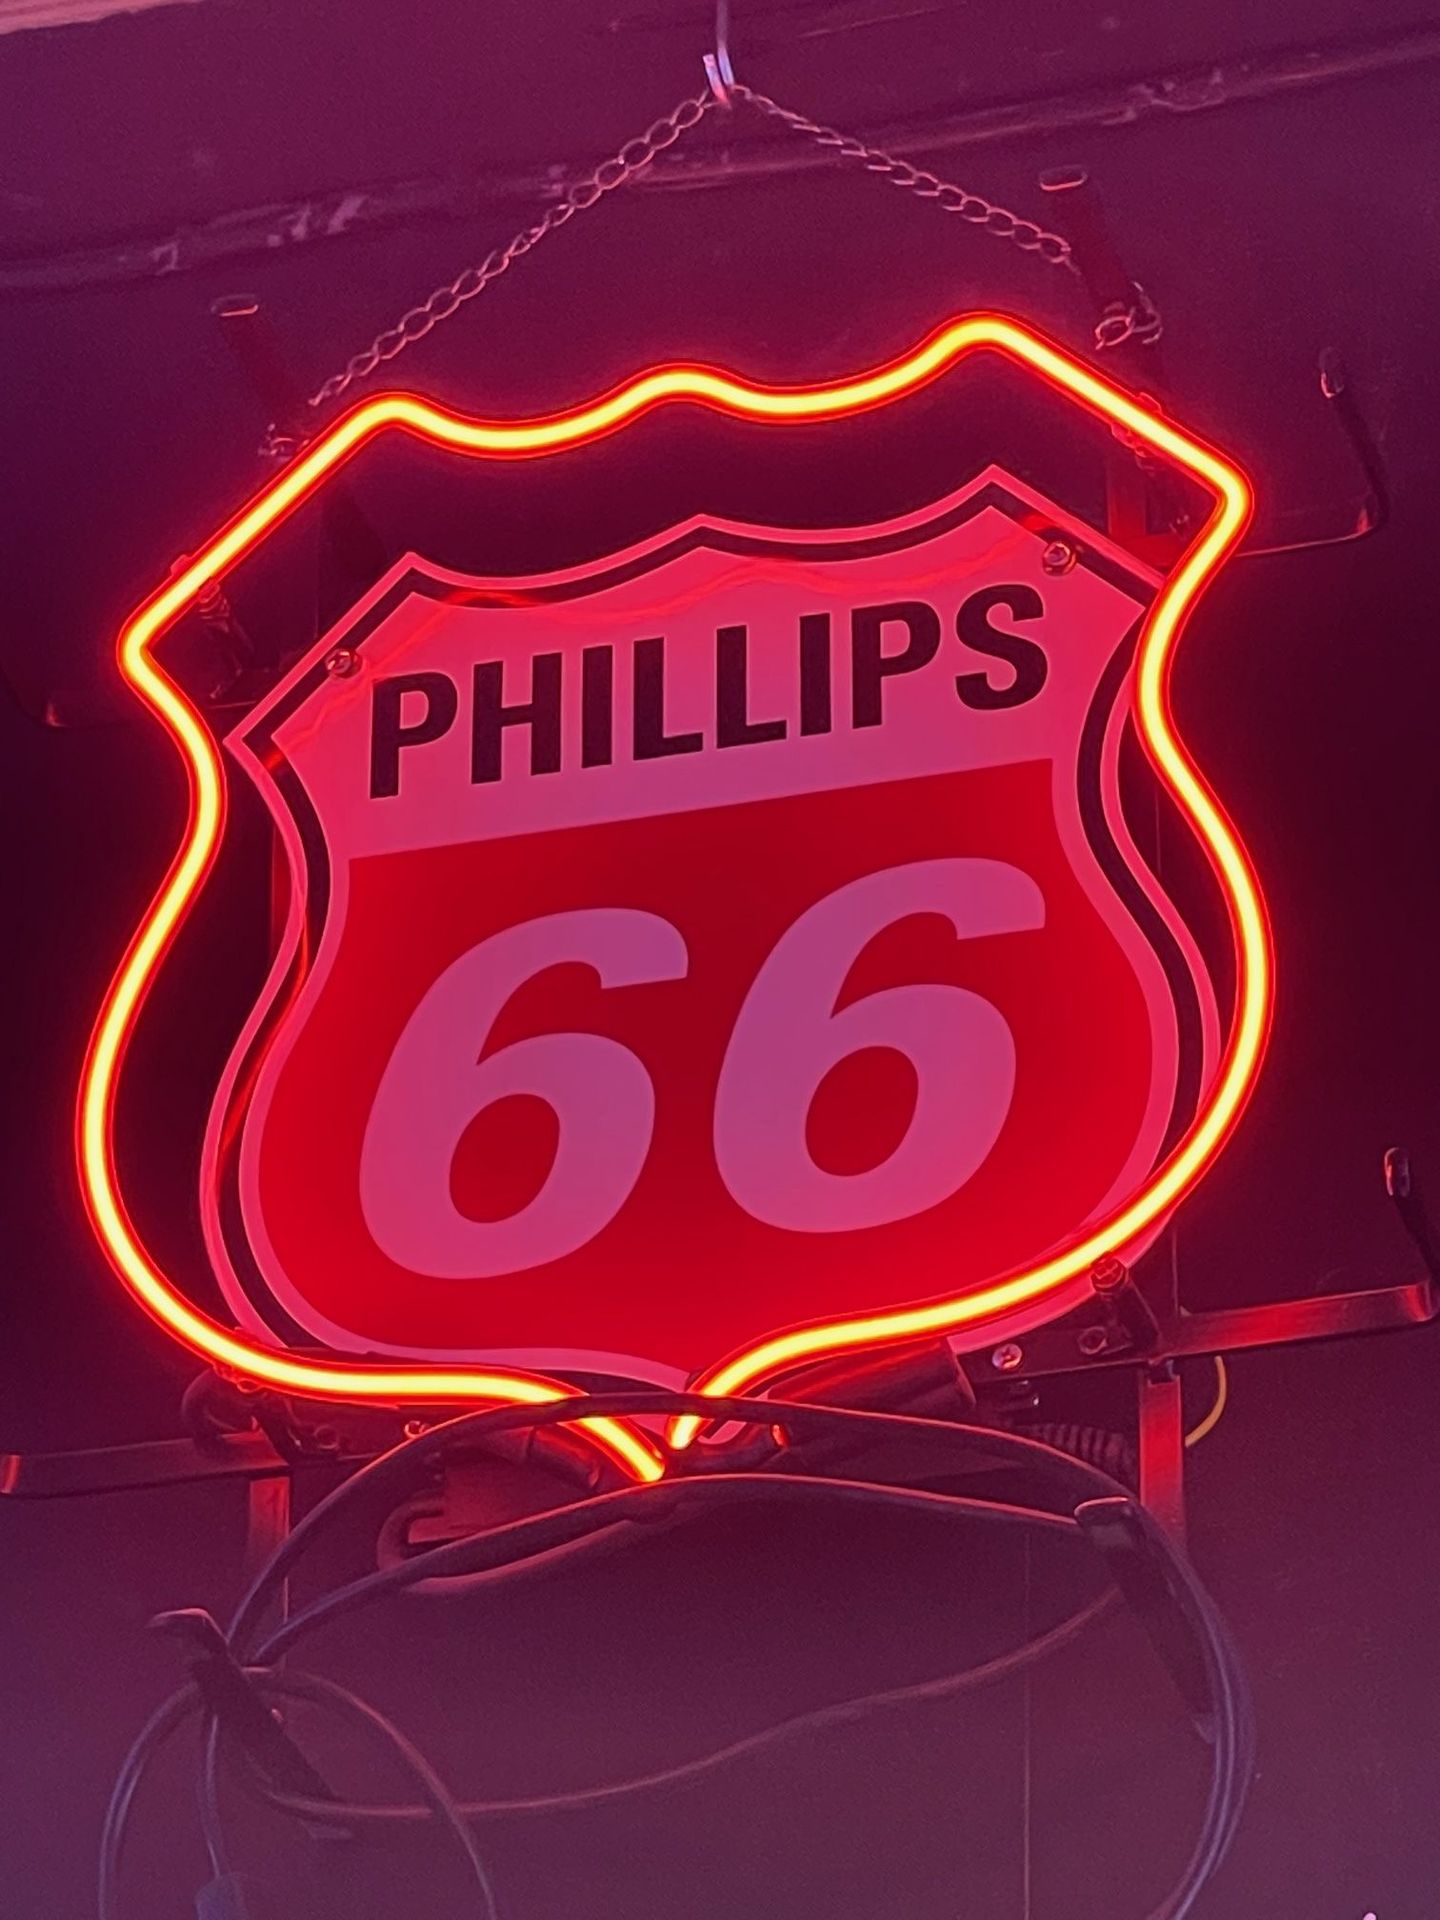 Philips 66 Neon Sign with Enamel Backplate Philips 66 Leuchtreklame mit emaillie&hellip;